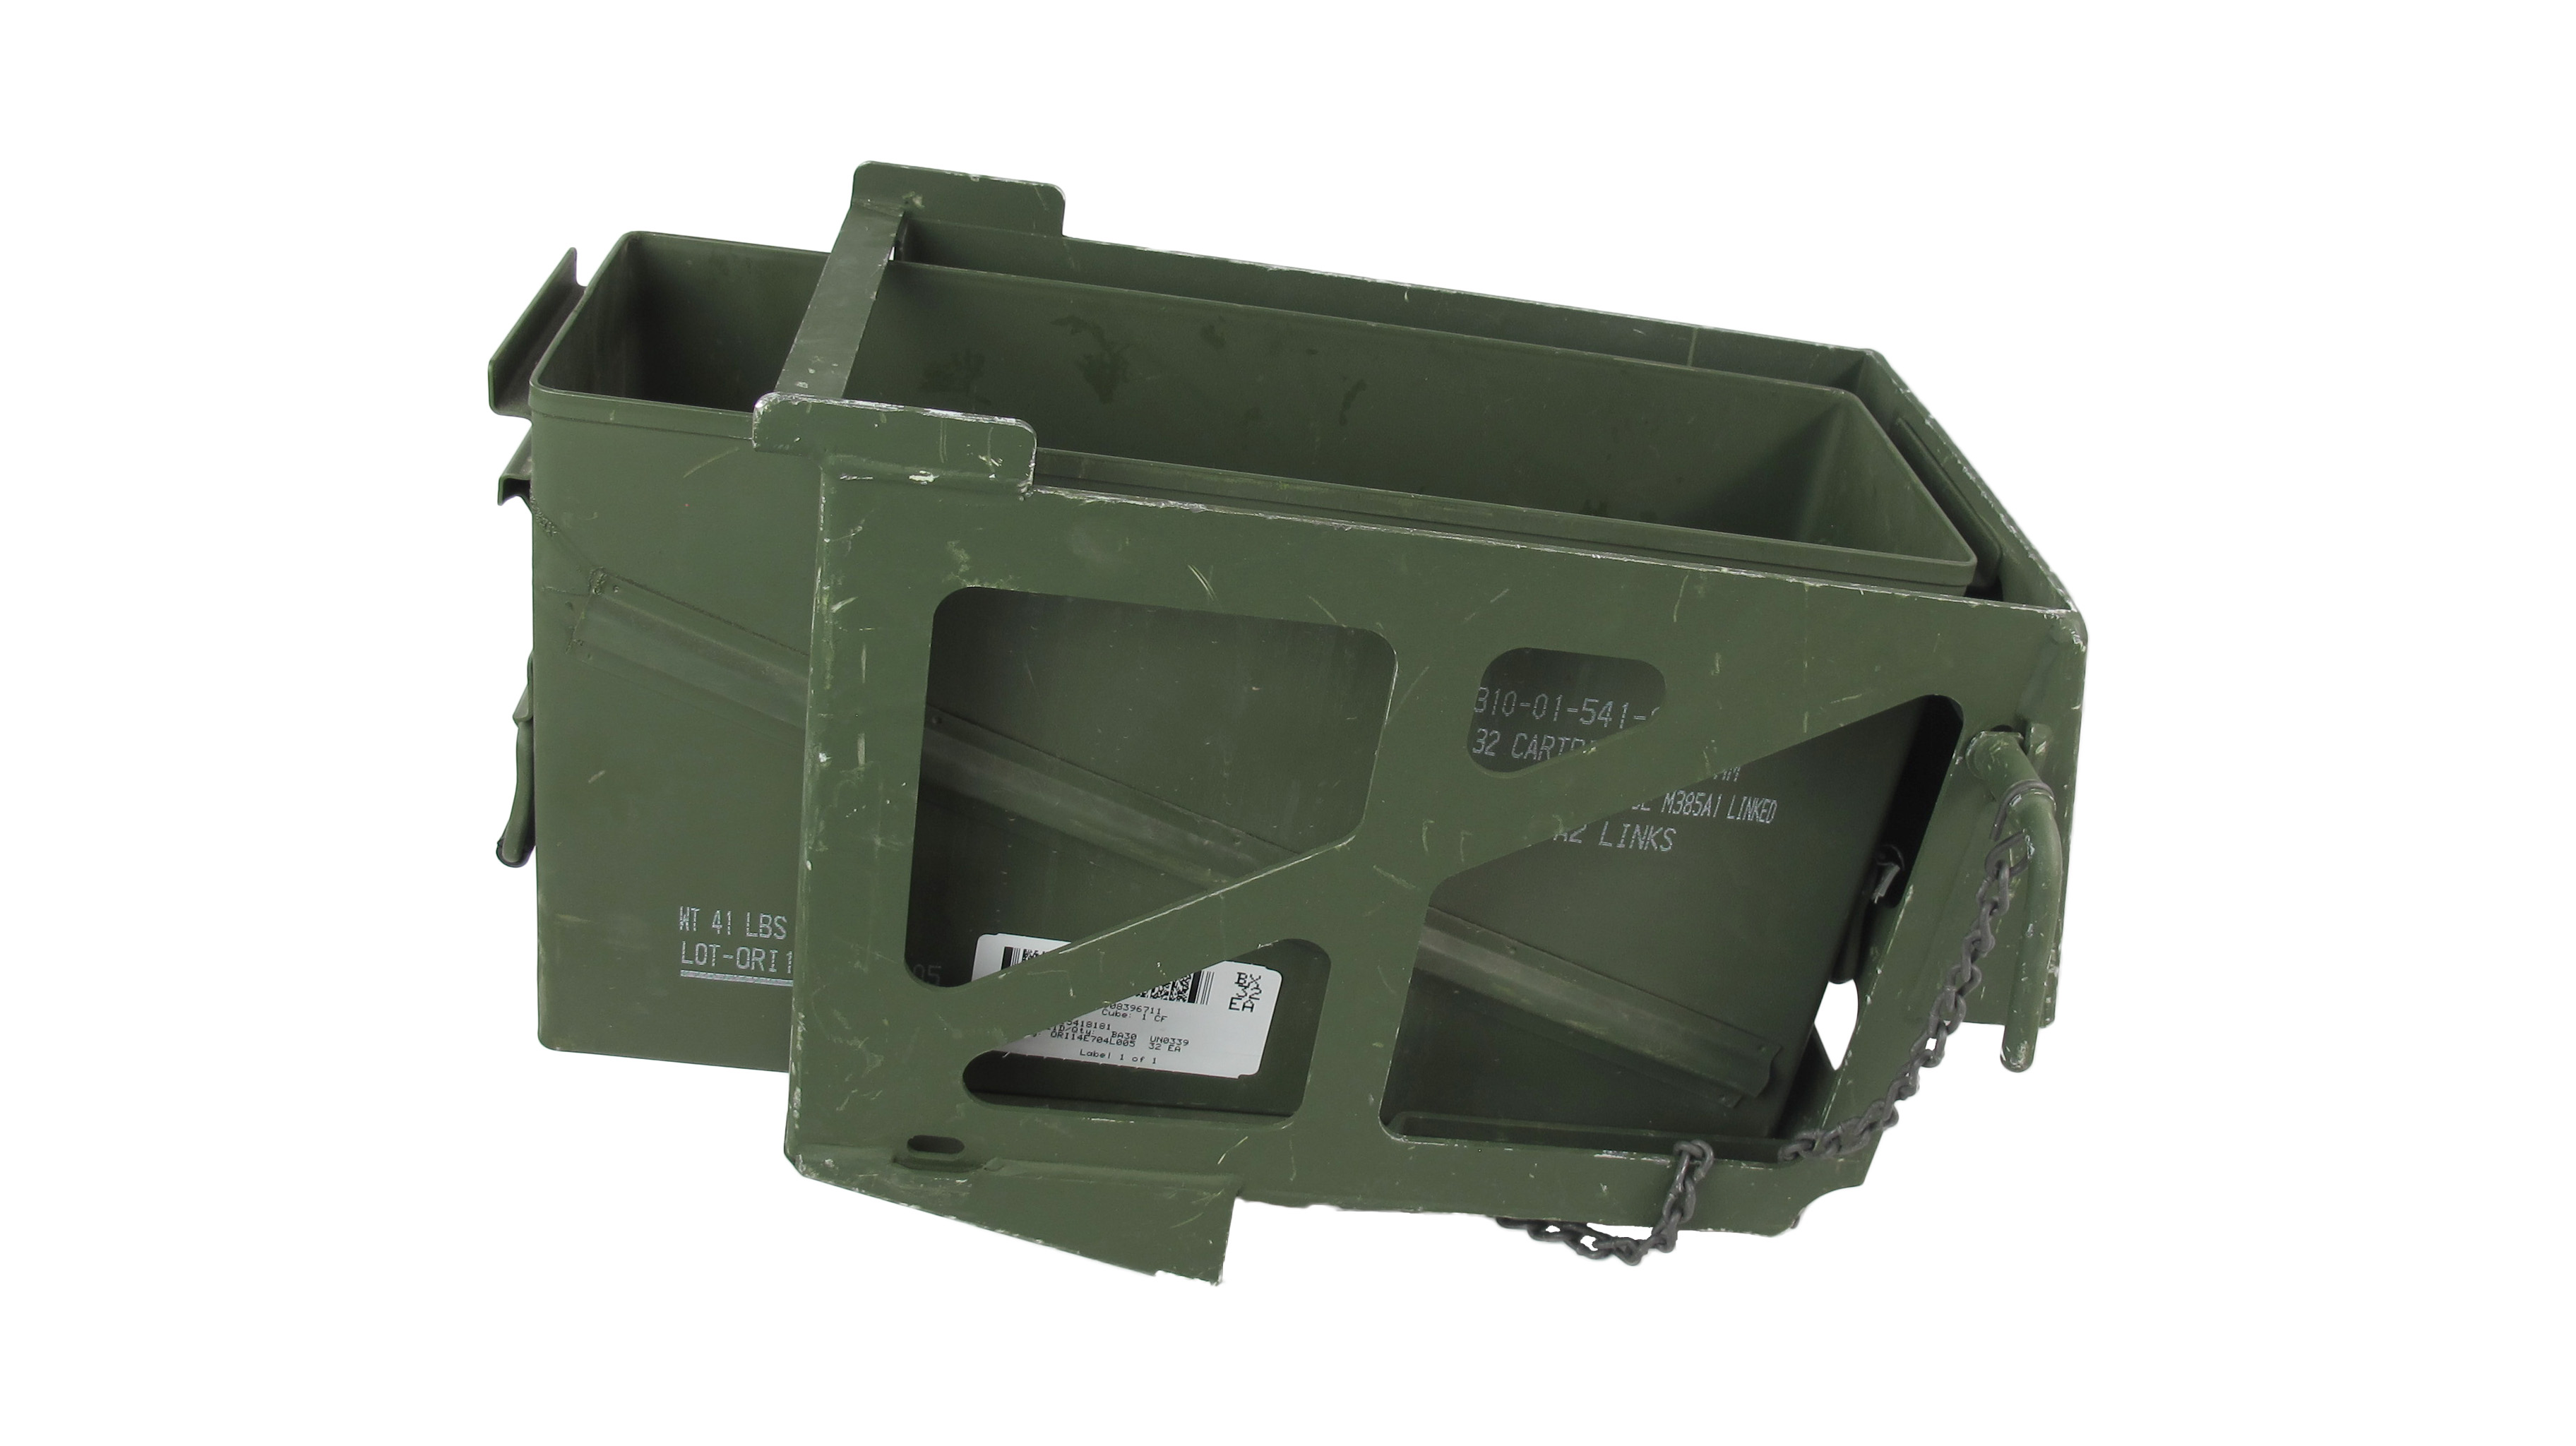 MK64 and MK93 Ammunition Tray is for the MK19 or large .50 caliber ammuniti...